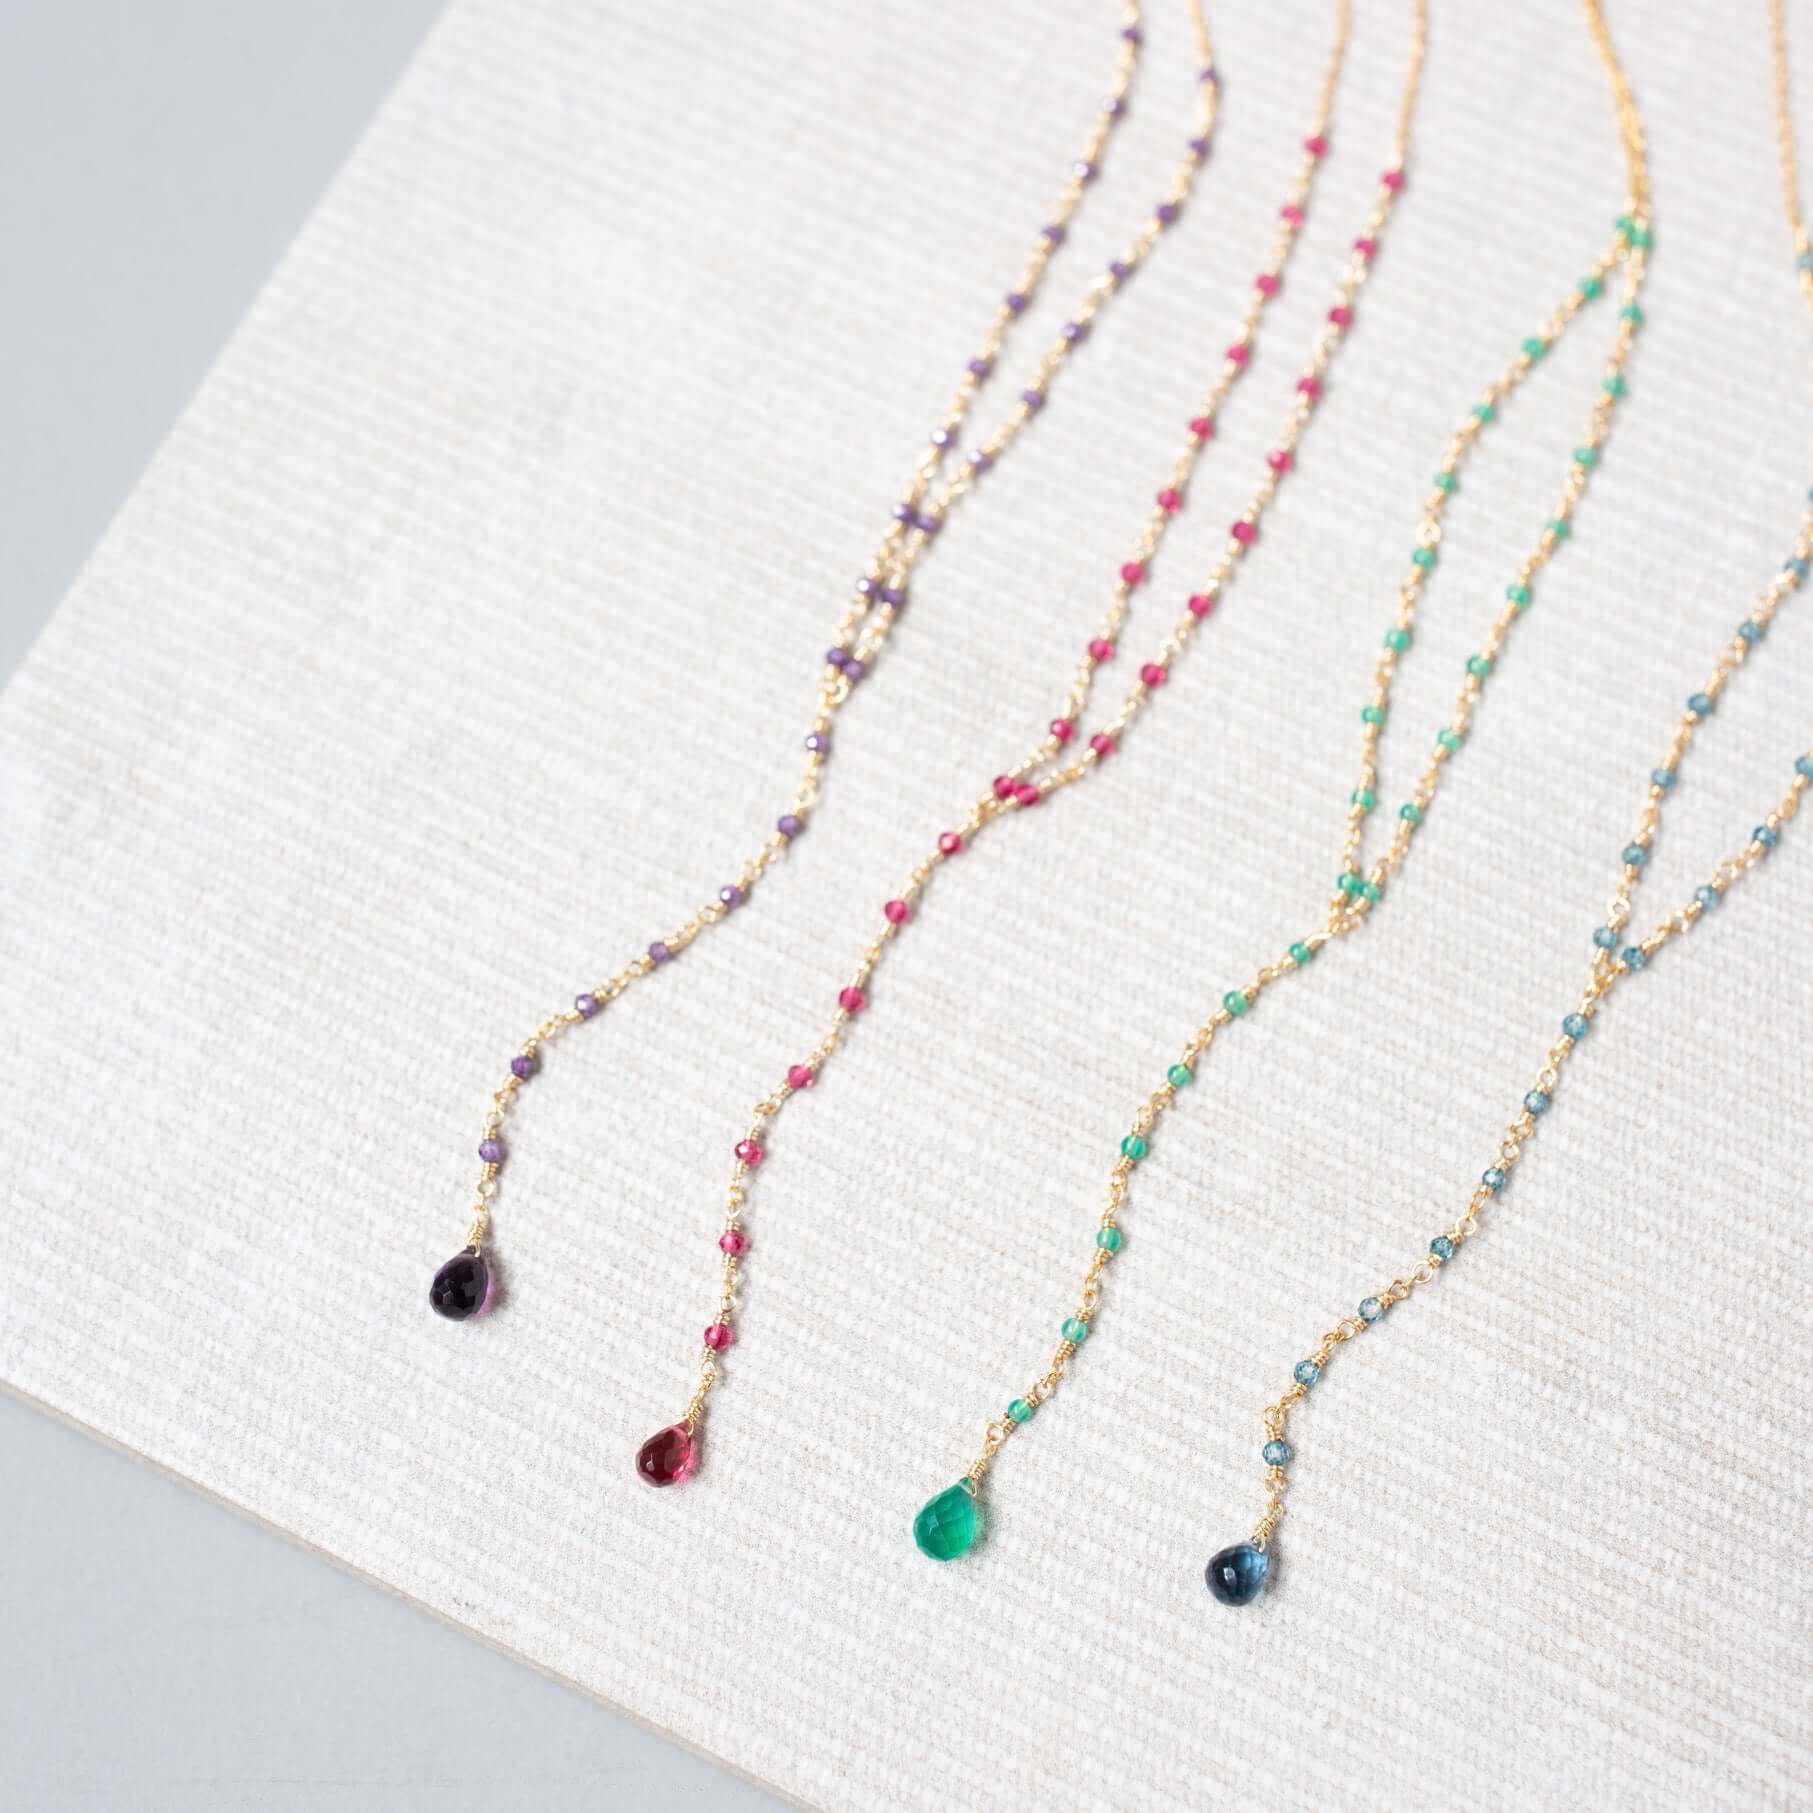 Against a clean white canvas, lolite, amethyst, pink tourmaline quartz, and green onyx necklaces reveal their individual beauty in a scene of pure elegance and simplicity